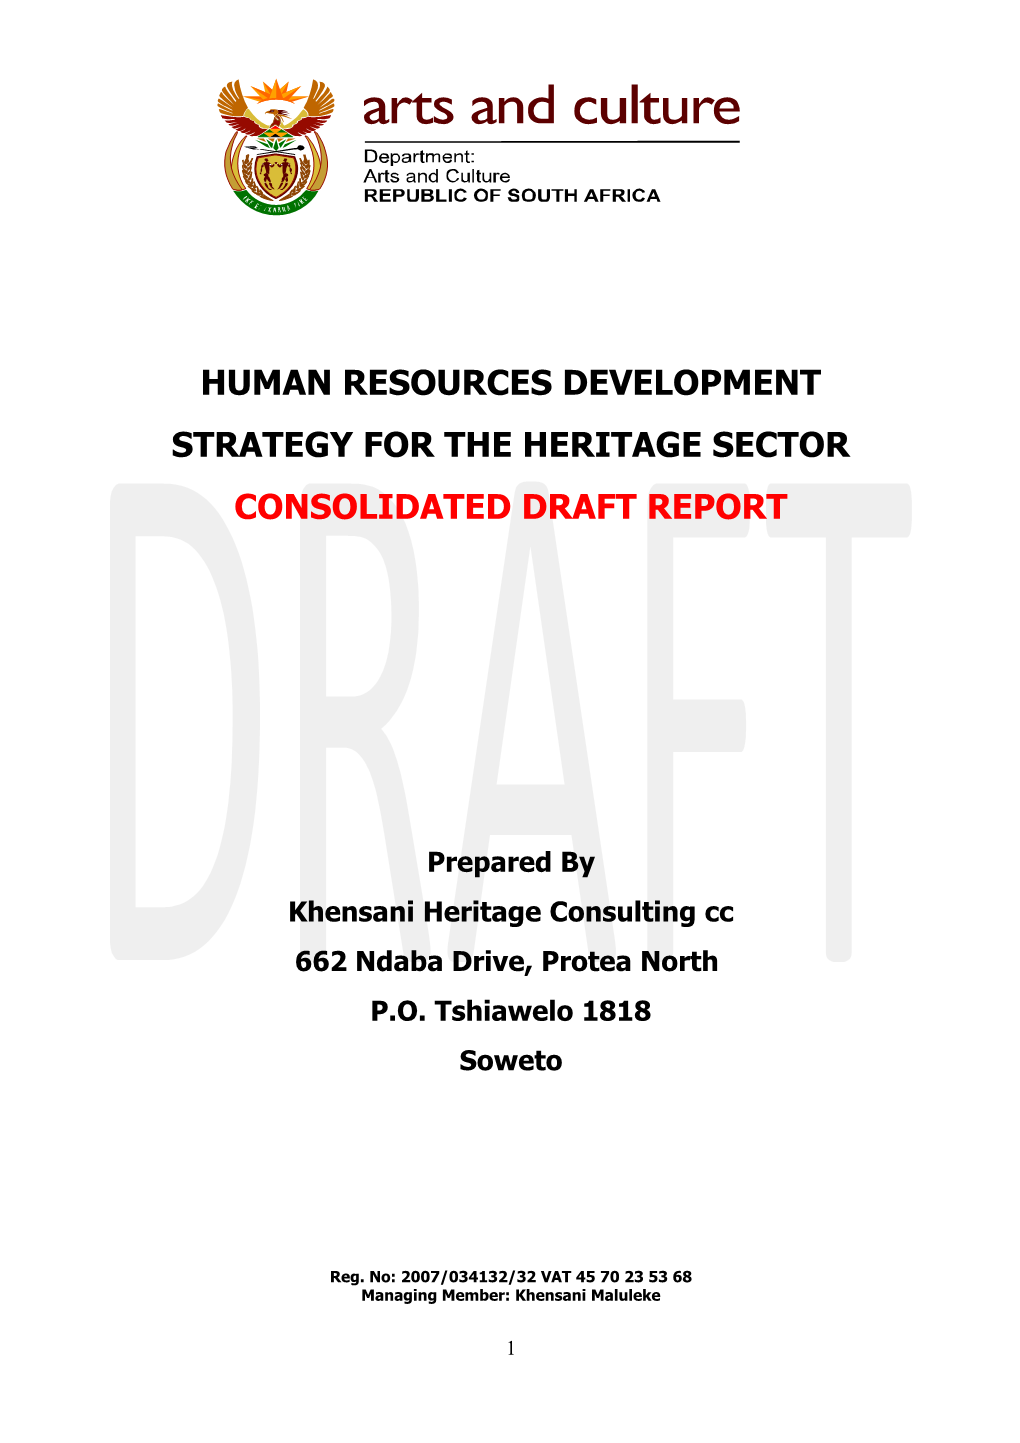 Human Resources Development Strategy for the Heritage Sectorconsolidated Draft Report